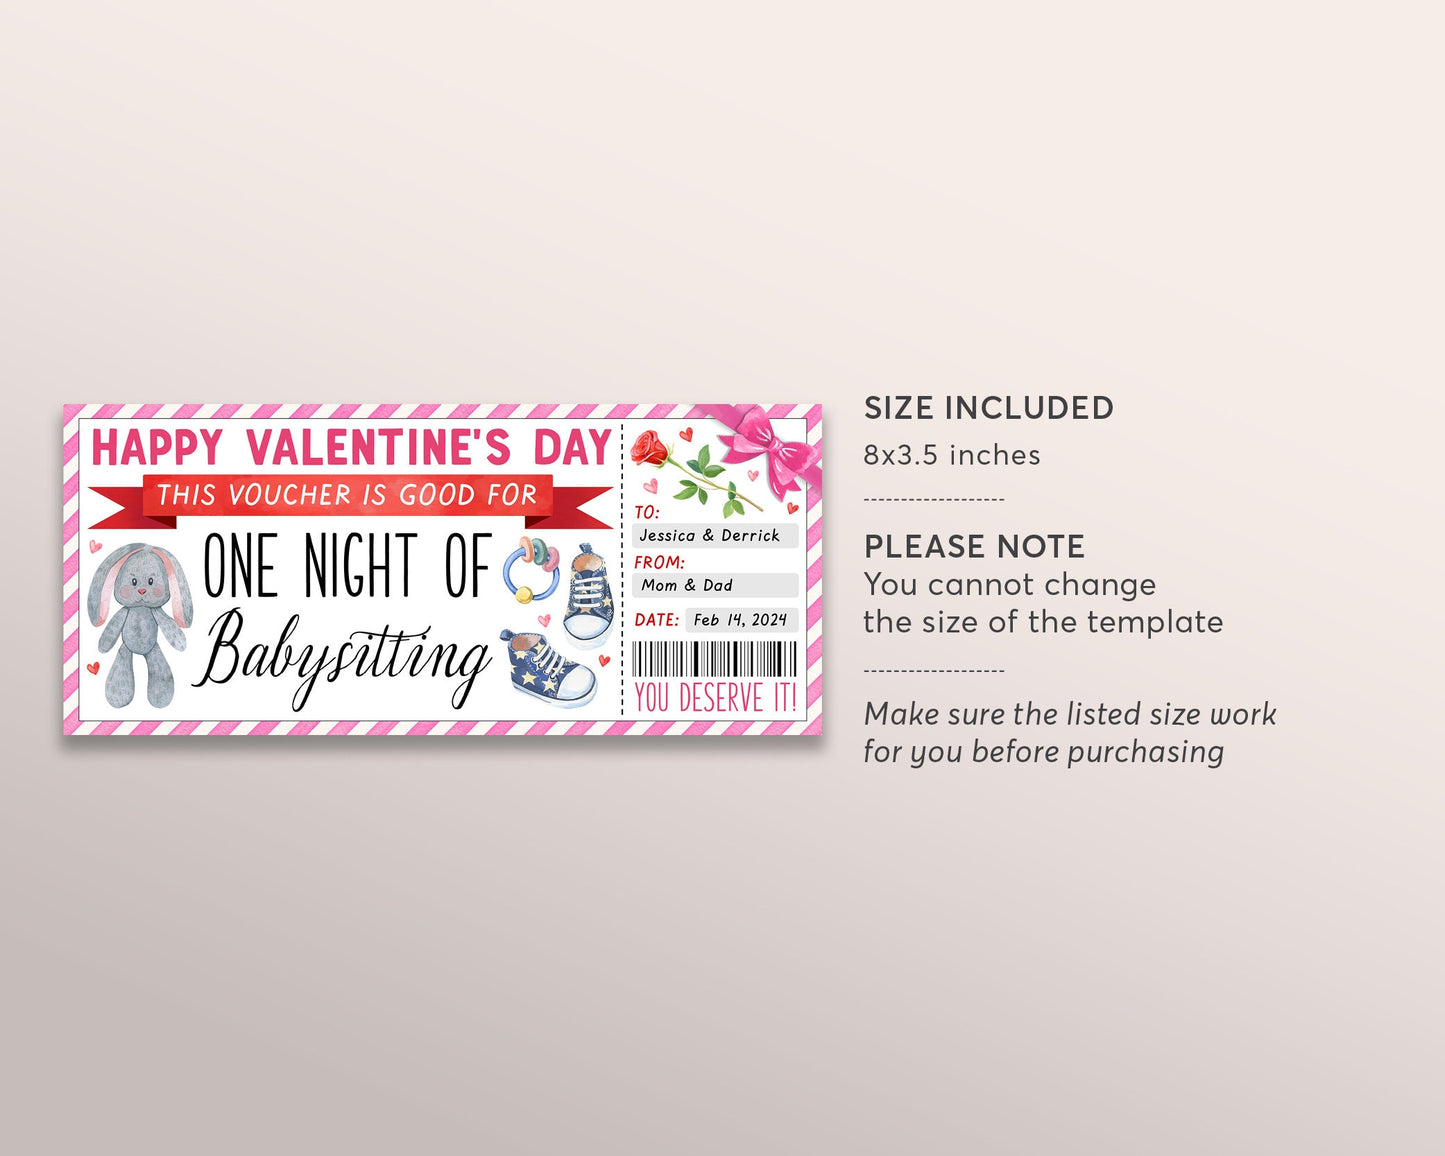 Valentines Day Babysitting Gift Coupon Editable Template, Valentine Surprise Babysitter Gift Ticket Voucher, New Mom Certificate Gift Card